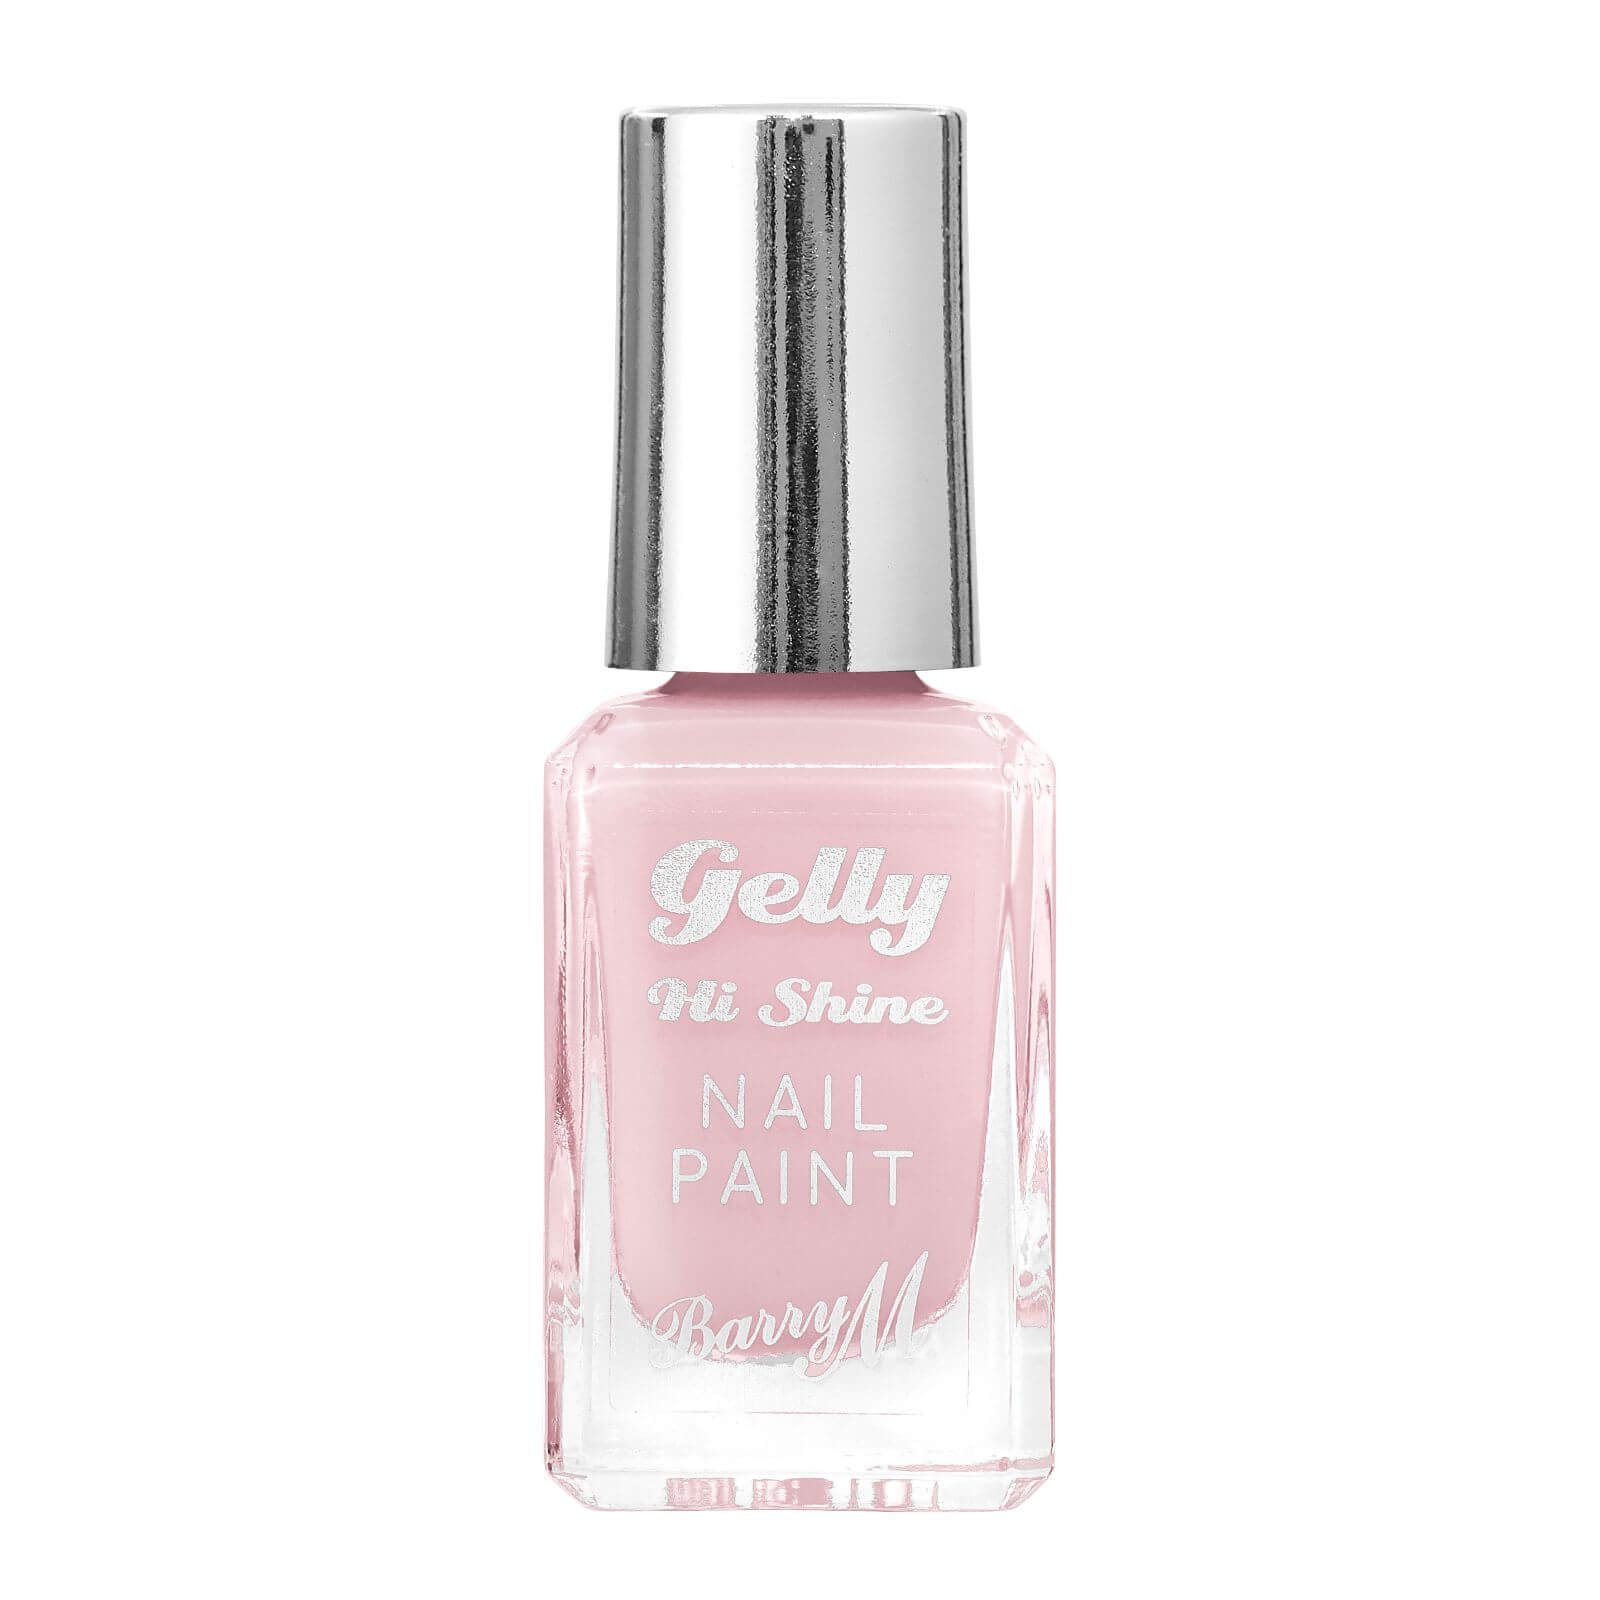 Barry M Cosmetics Gelly Hi Shine Nail Paint (Various Shades) - 16 Candy Floss